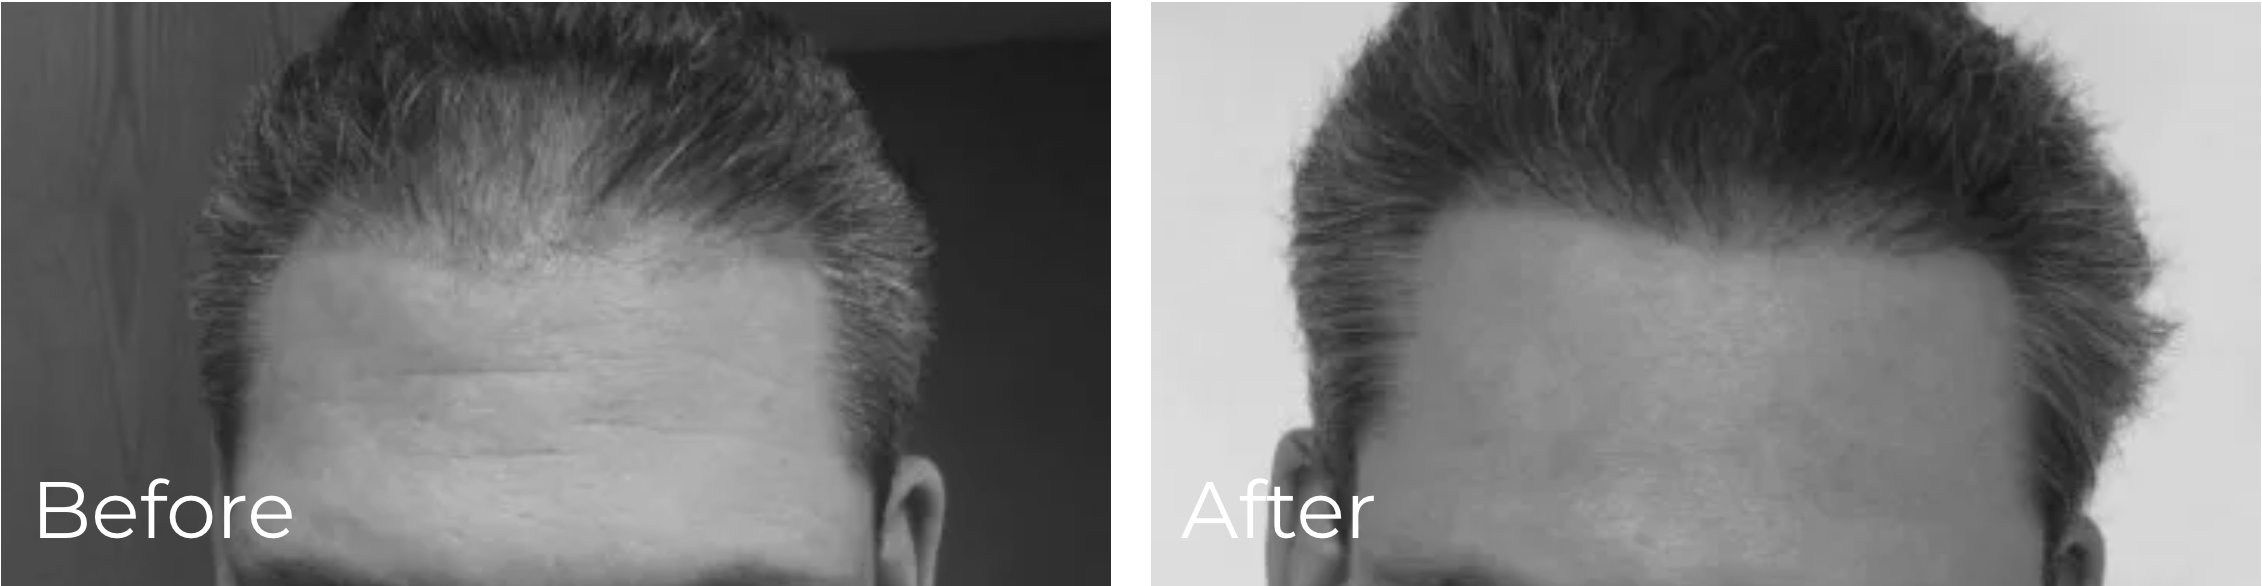 before and after photos of FUE Hair Micrograft Transplant Surgery - XSCULPT Chicago Illinois